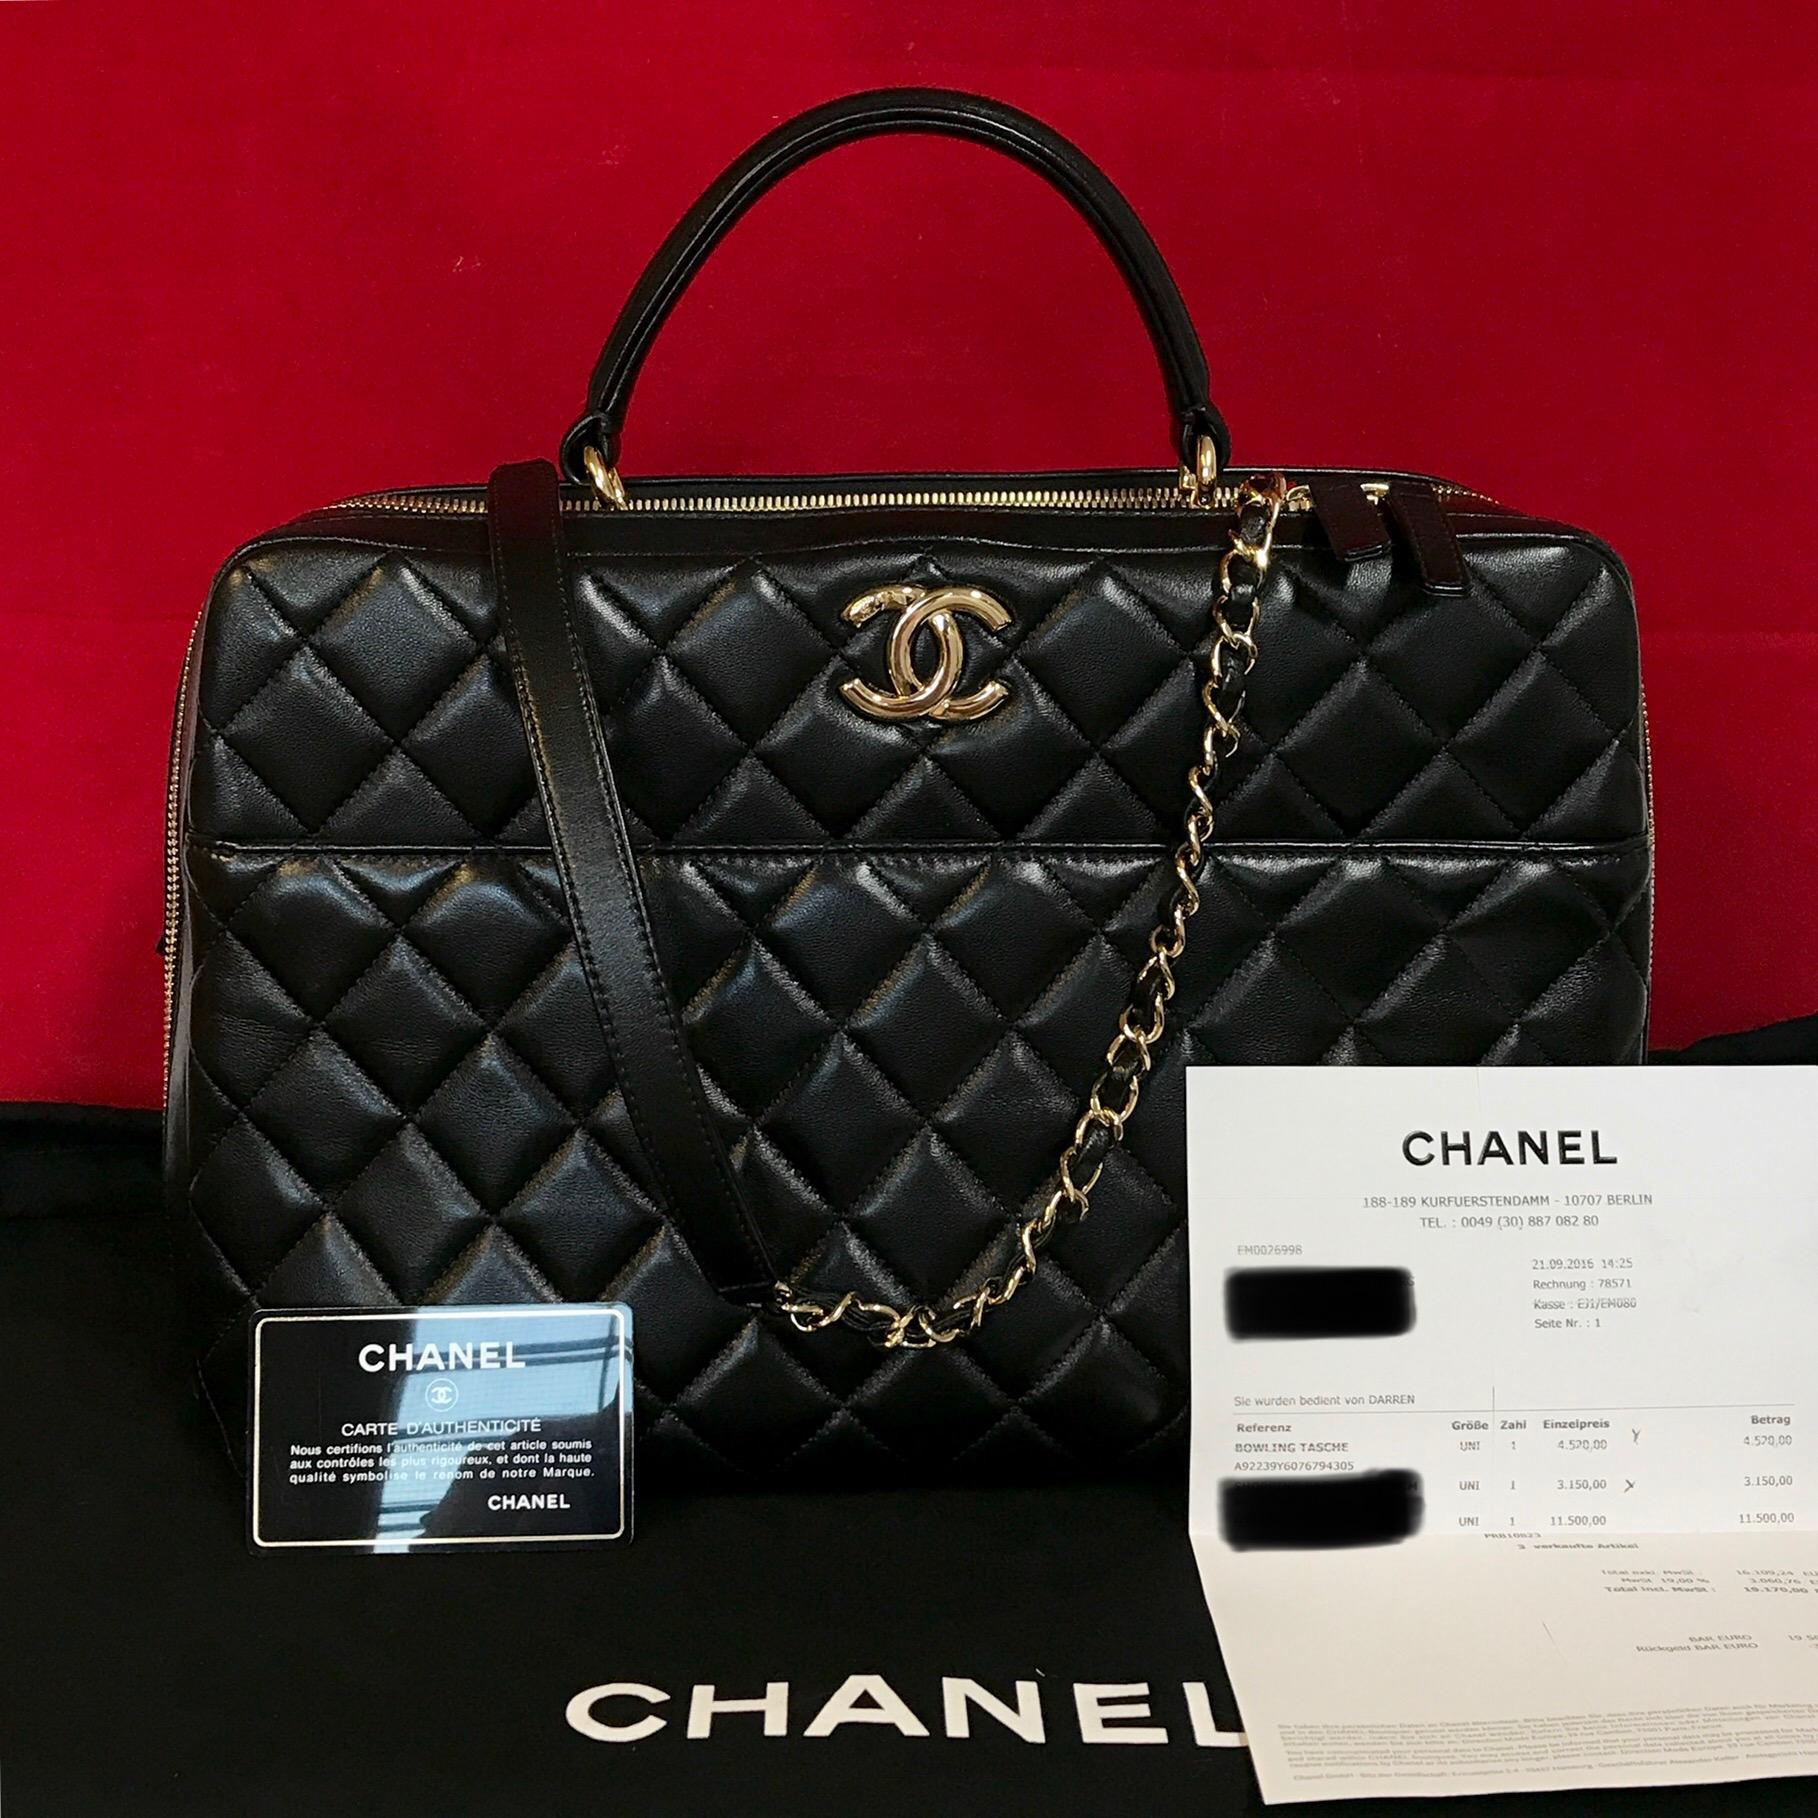 CHANEL CC bowling bag made of black quilted lambskin & gold hardware.

The bag is in a very good condition and has minimal signs of use.

The delivery includes:
- Chanel bowling bag
- Dustbag
- warranty card
- Original CHANEL bill of